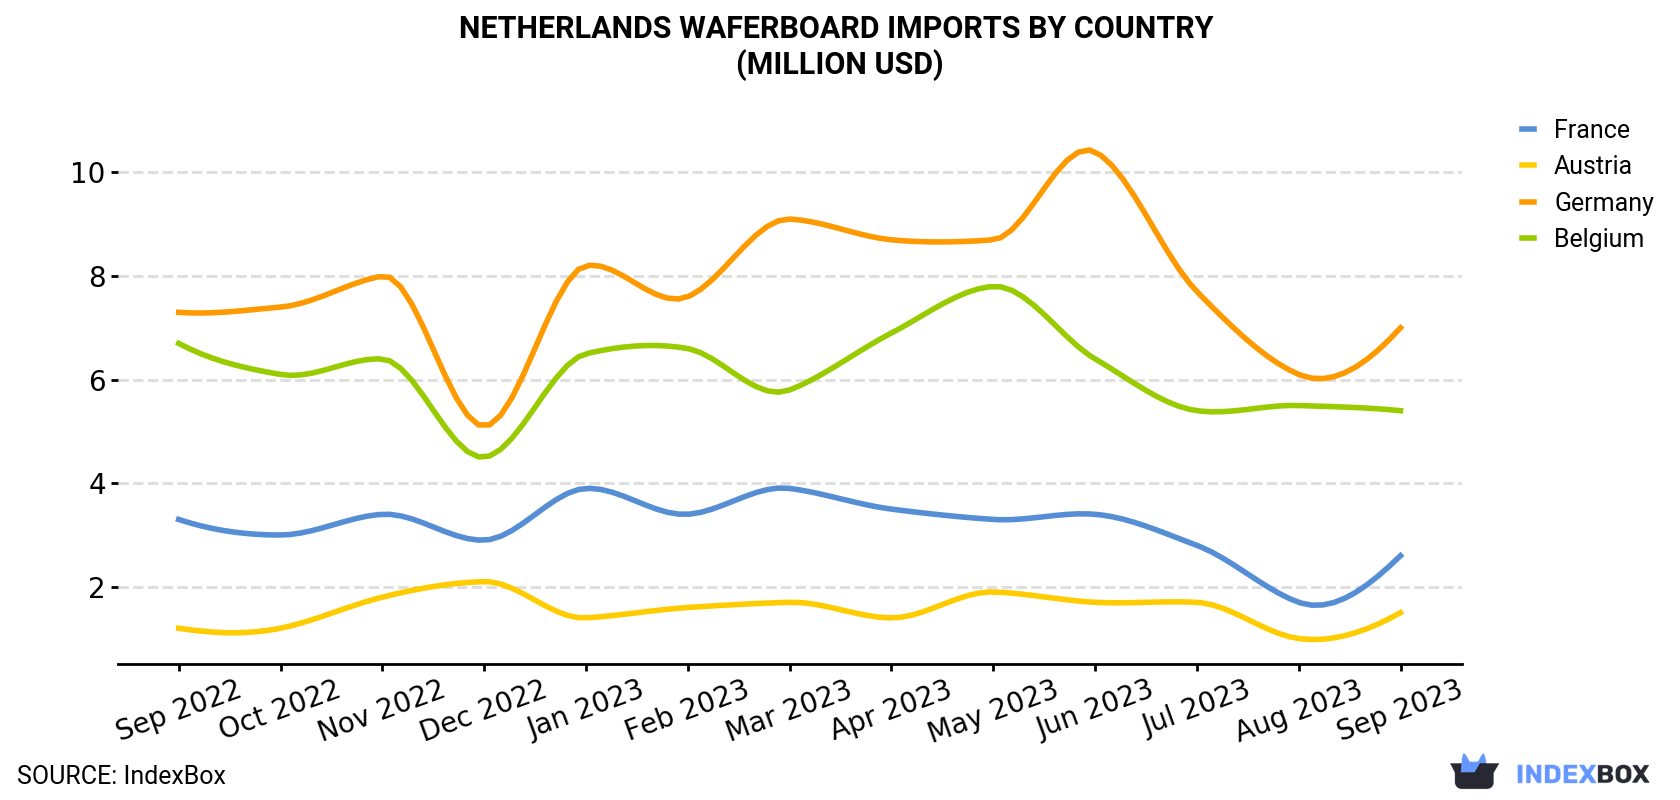 Netherlands Waferboard Imports By Country (Million USD)